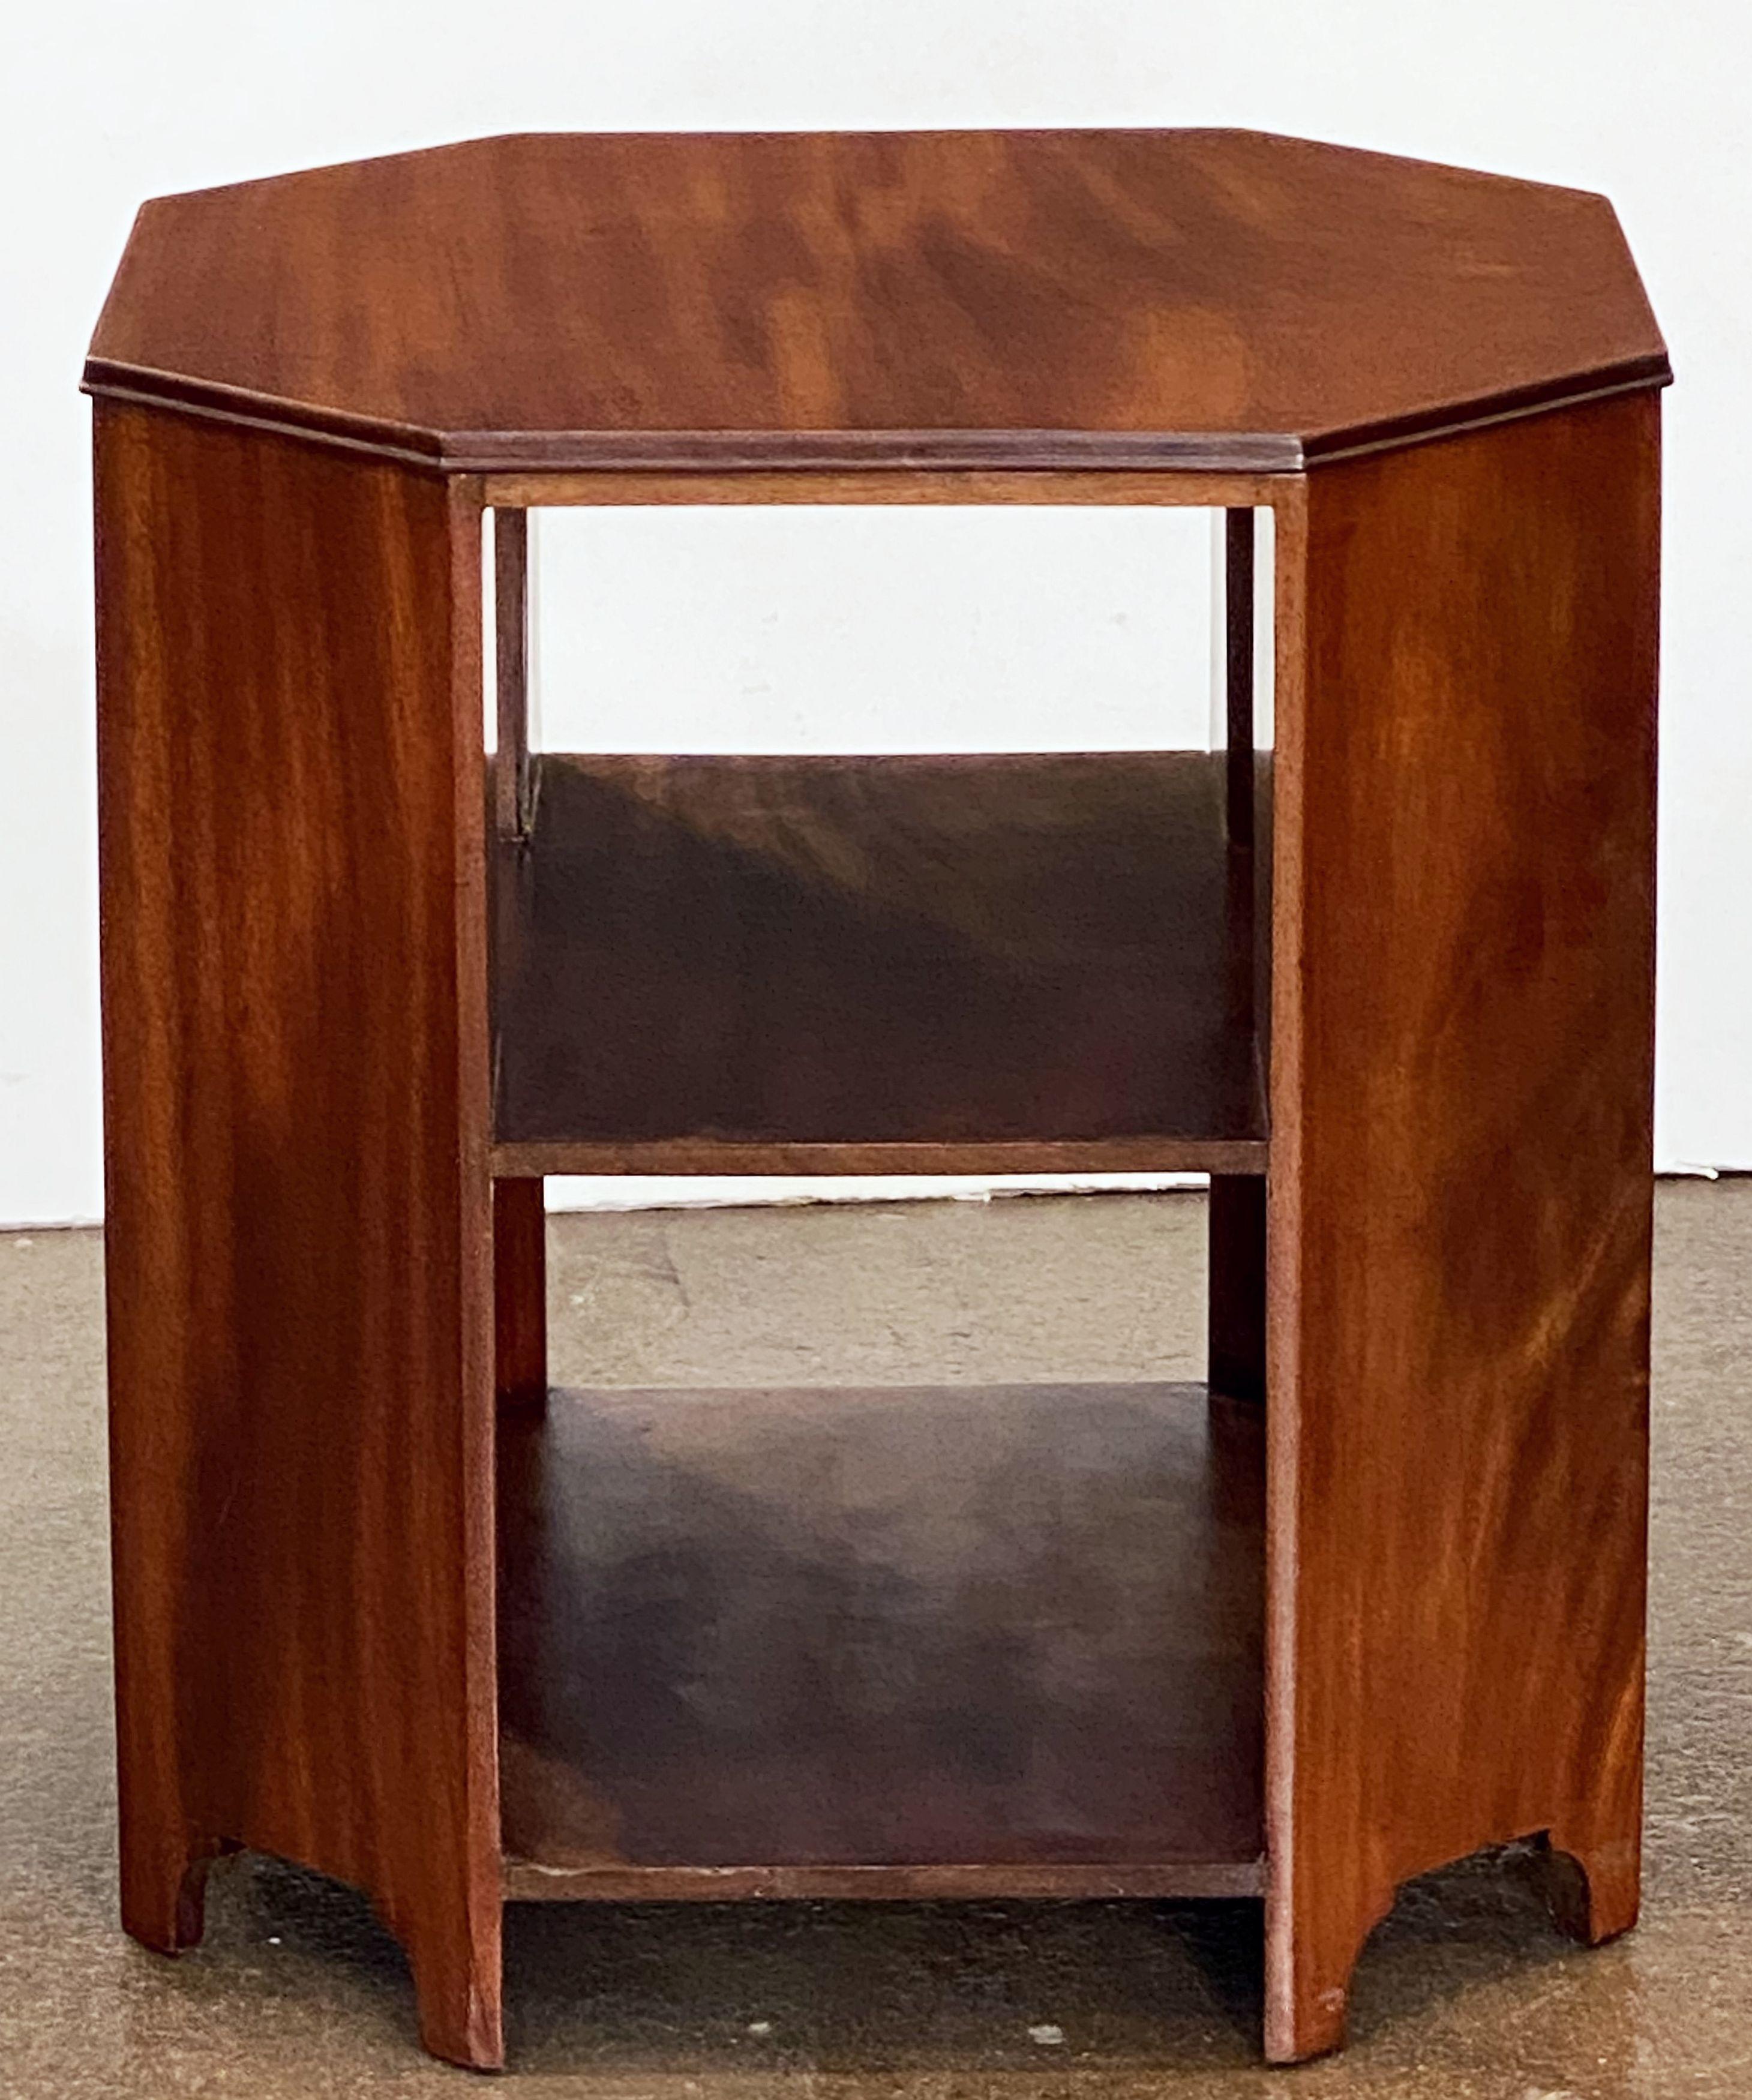 A fine English occasional or side table of mahogany in the Art Deco style, featuring a moulded octagonal top over two shelves with canted corner supports.